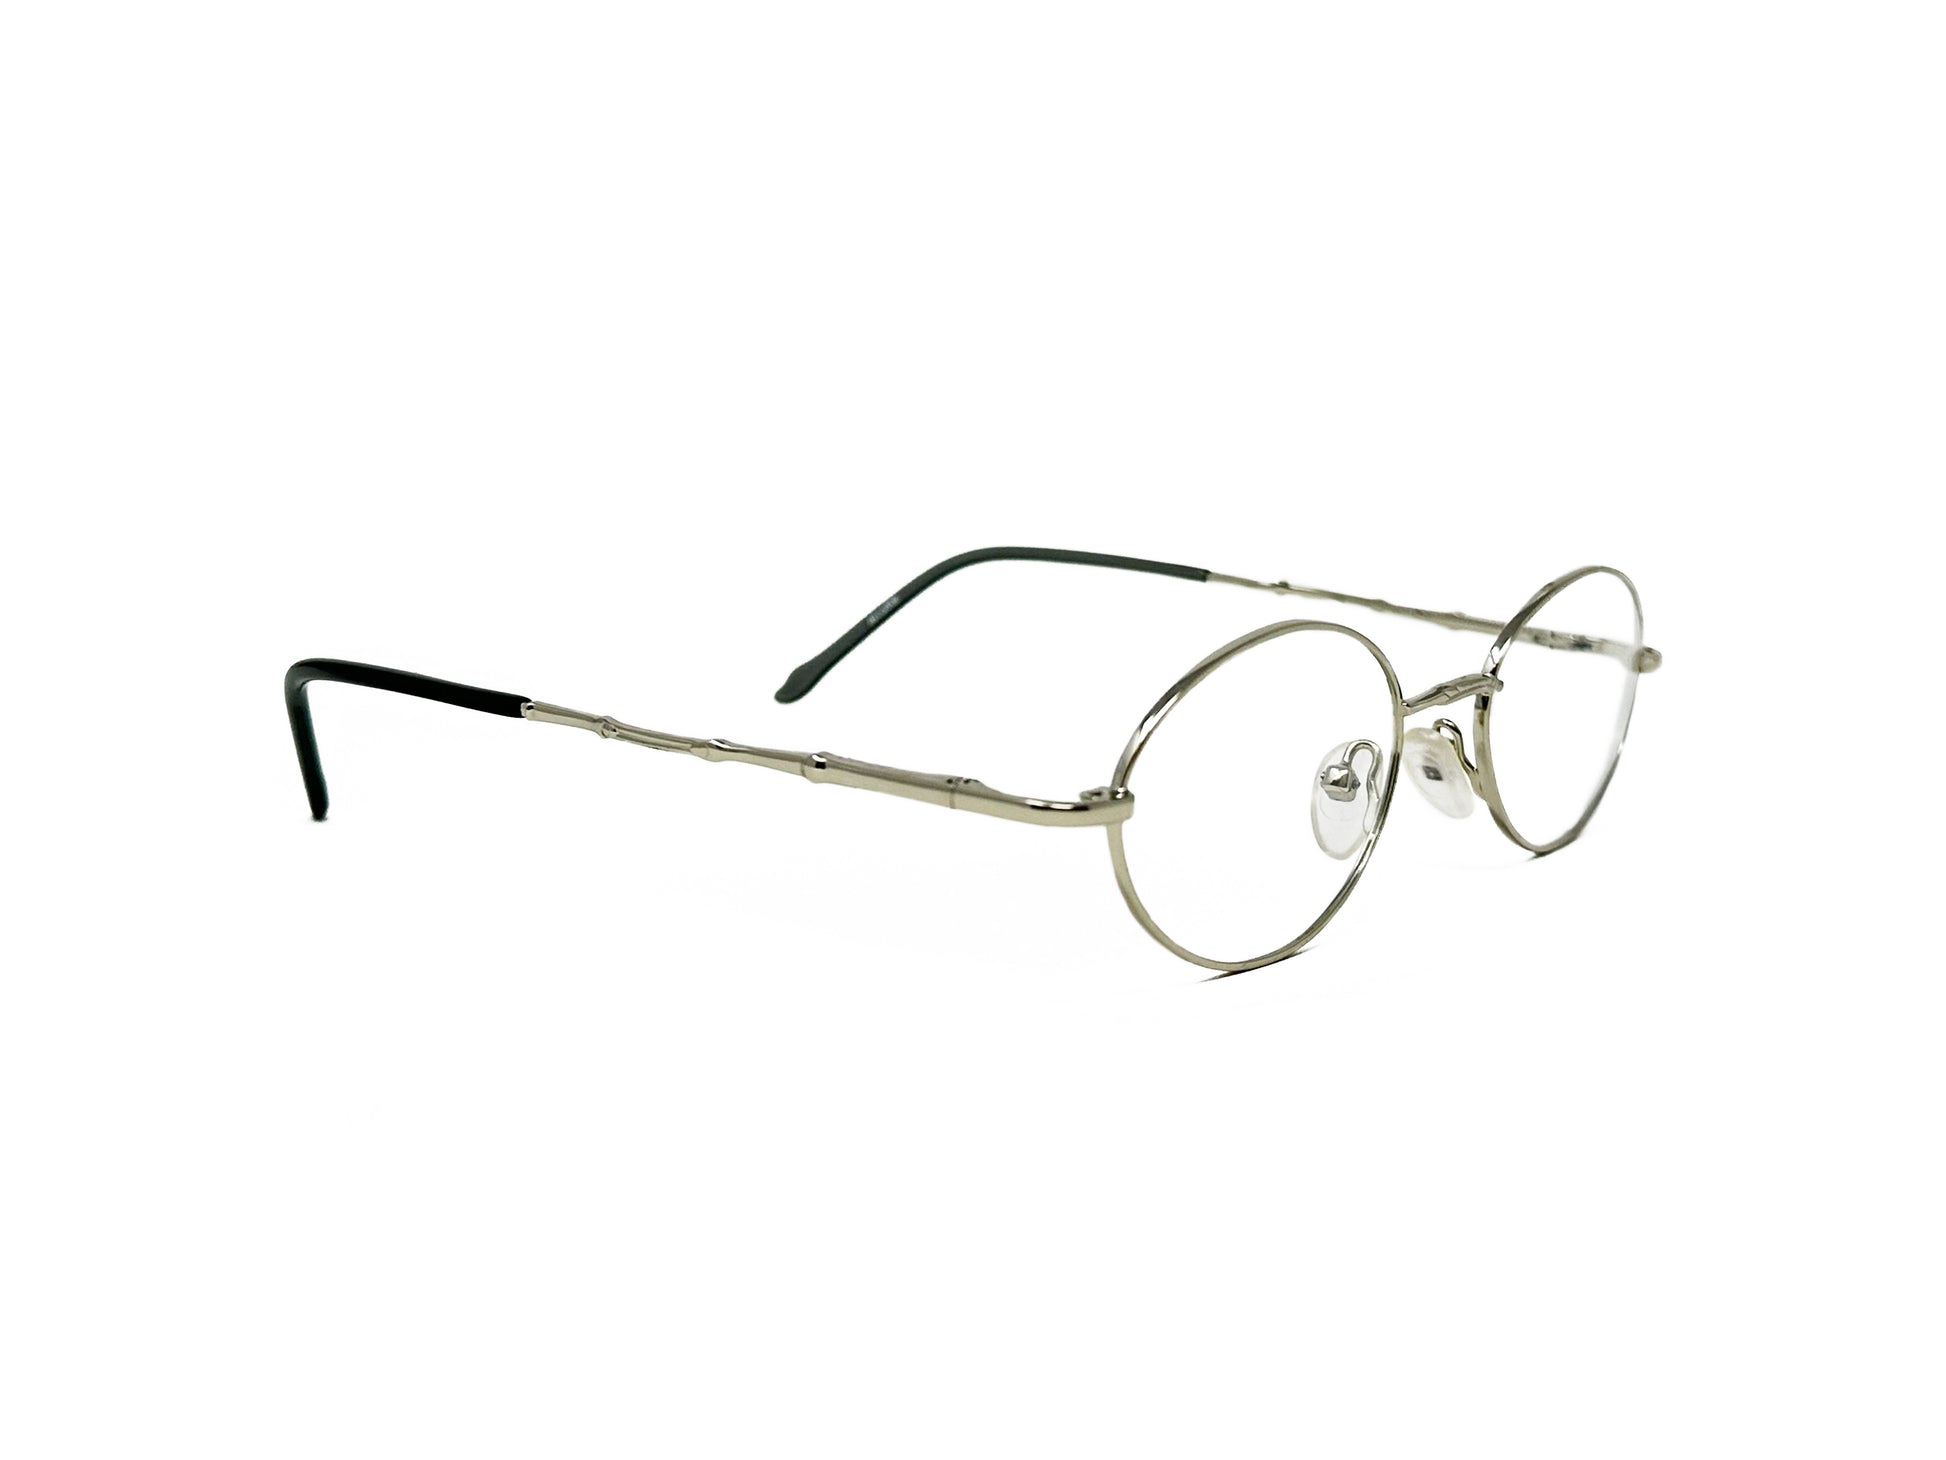 Aracdia oval metal optical frame with textured bridge. Model: 0726. Color: SIL - Silver metal. Side view.